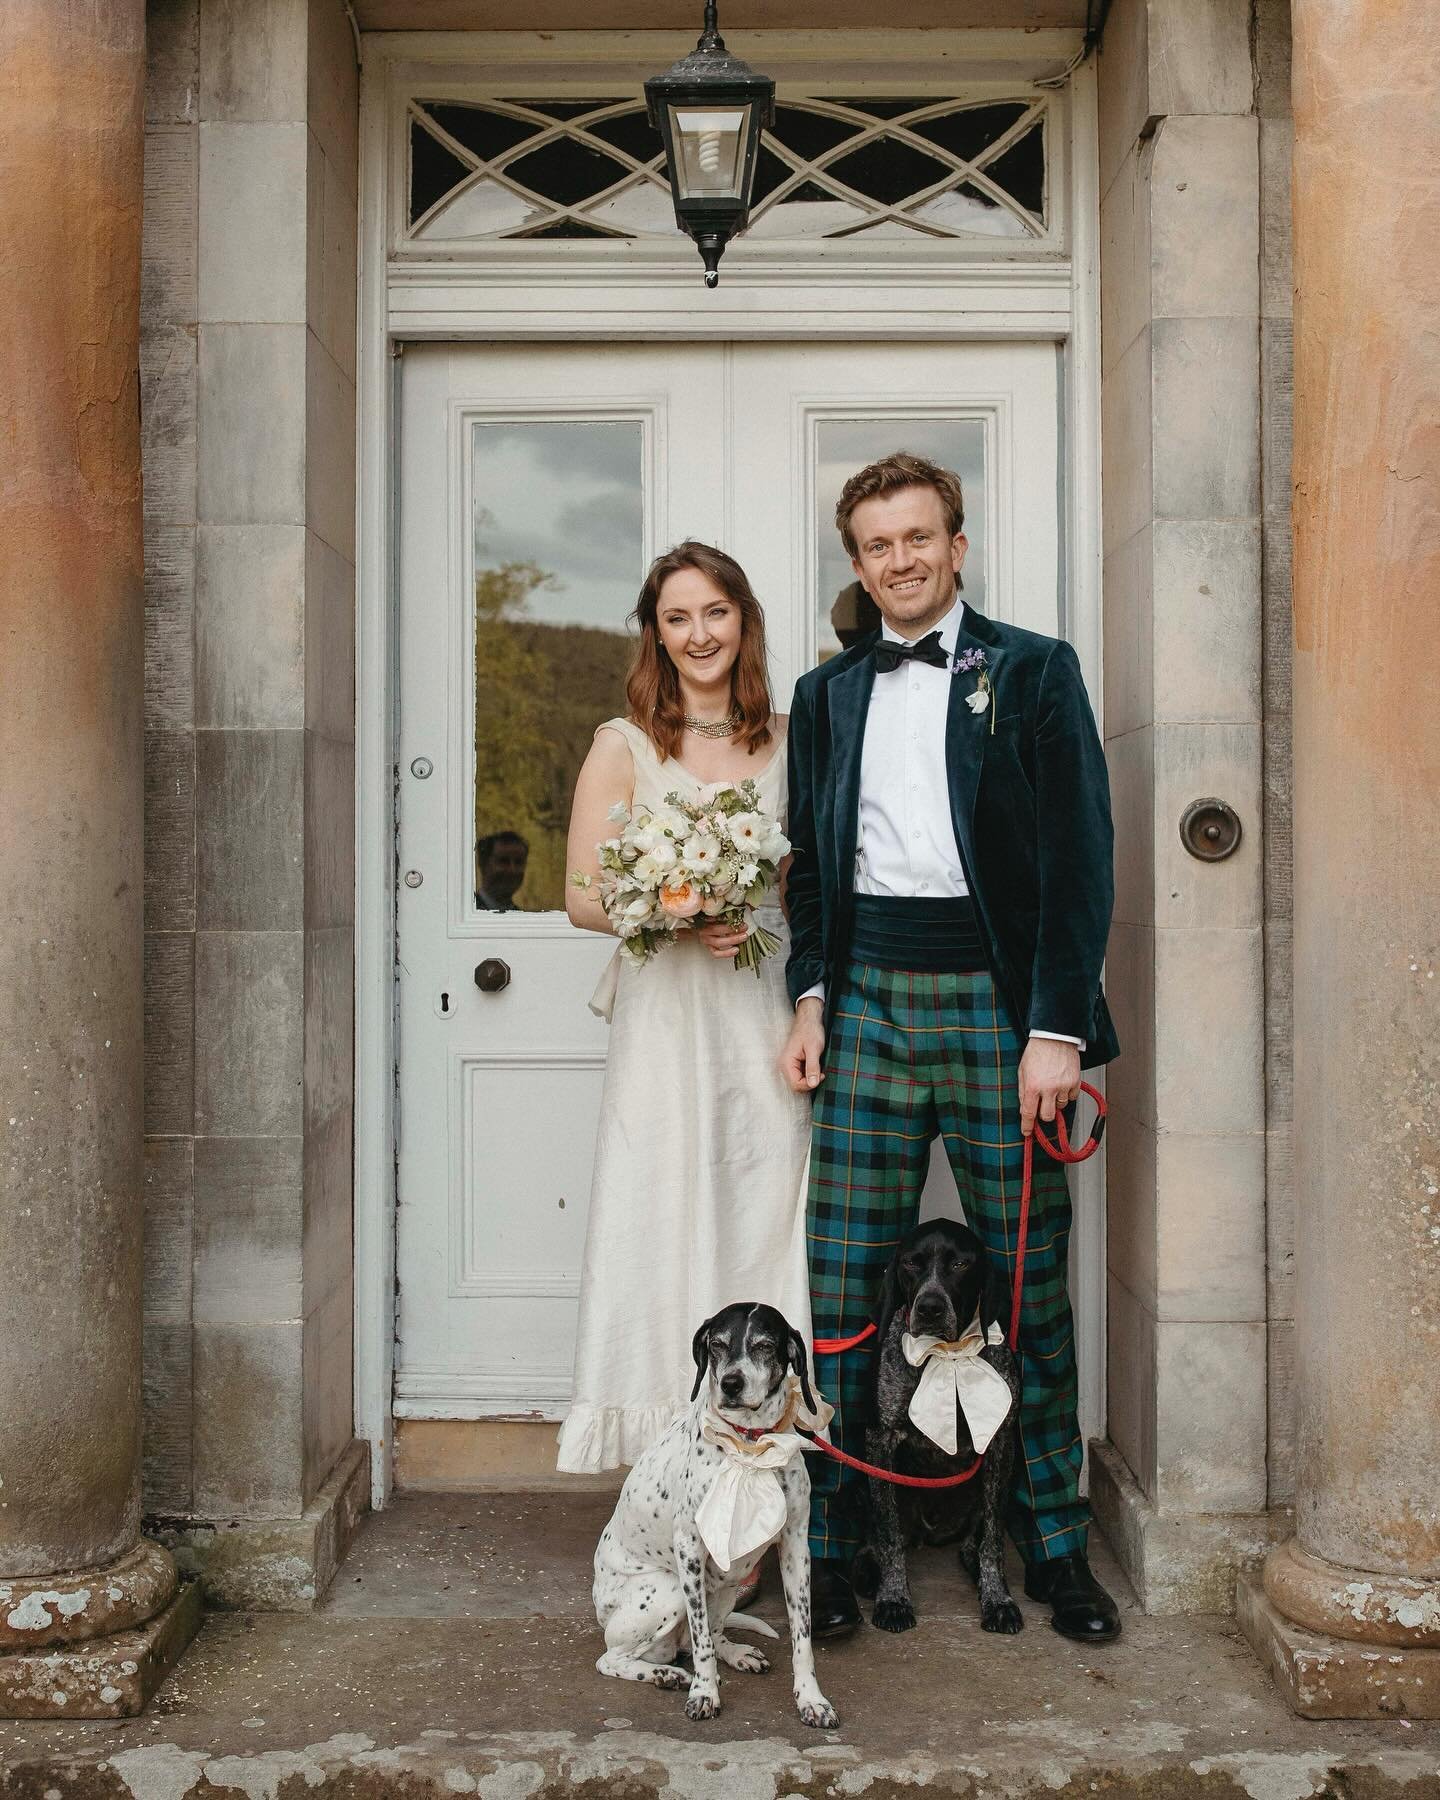 Juliet &amp; Edward tied the knot at the beautiful @traquairhouse in the Scottish Borders surrounded by all their closest family and friends. There was so much to love about this day, from Juliet&rsquo;s amazing vintage wedding dress (which was hand 